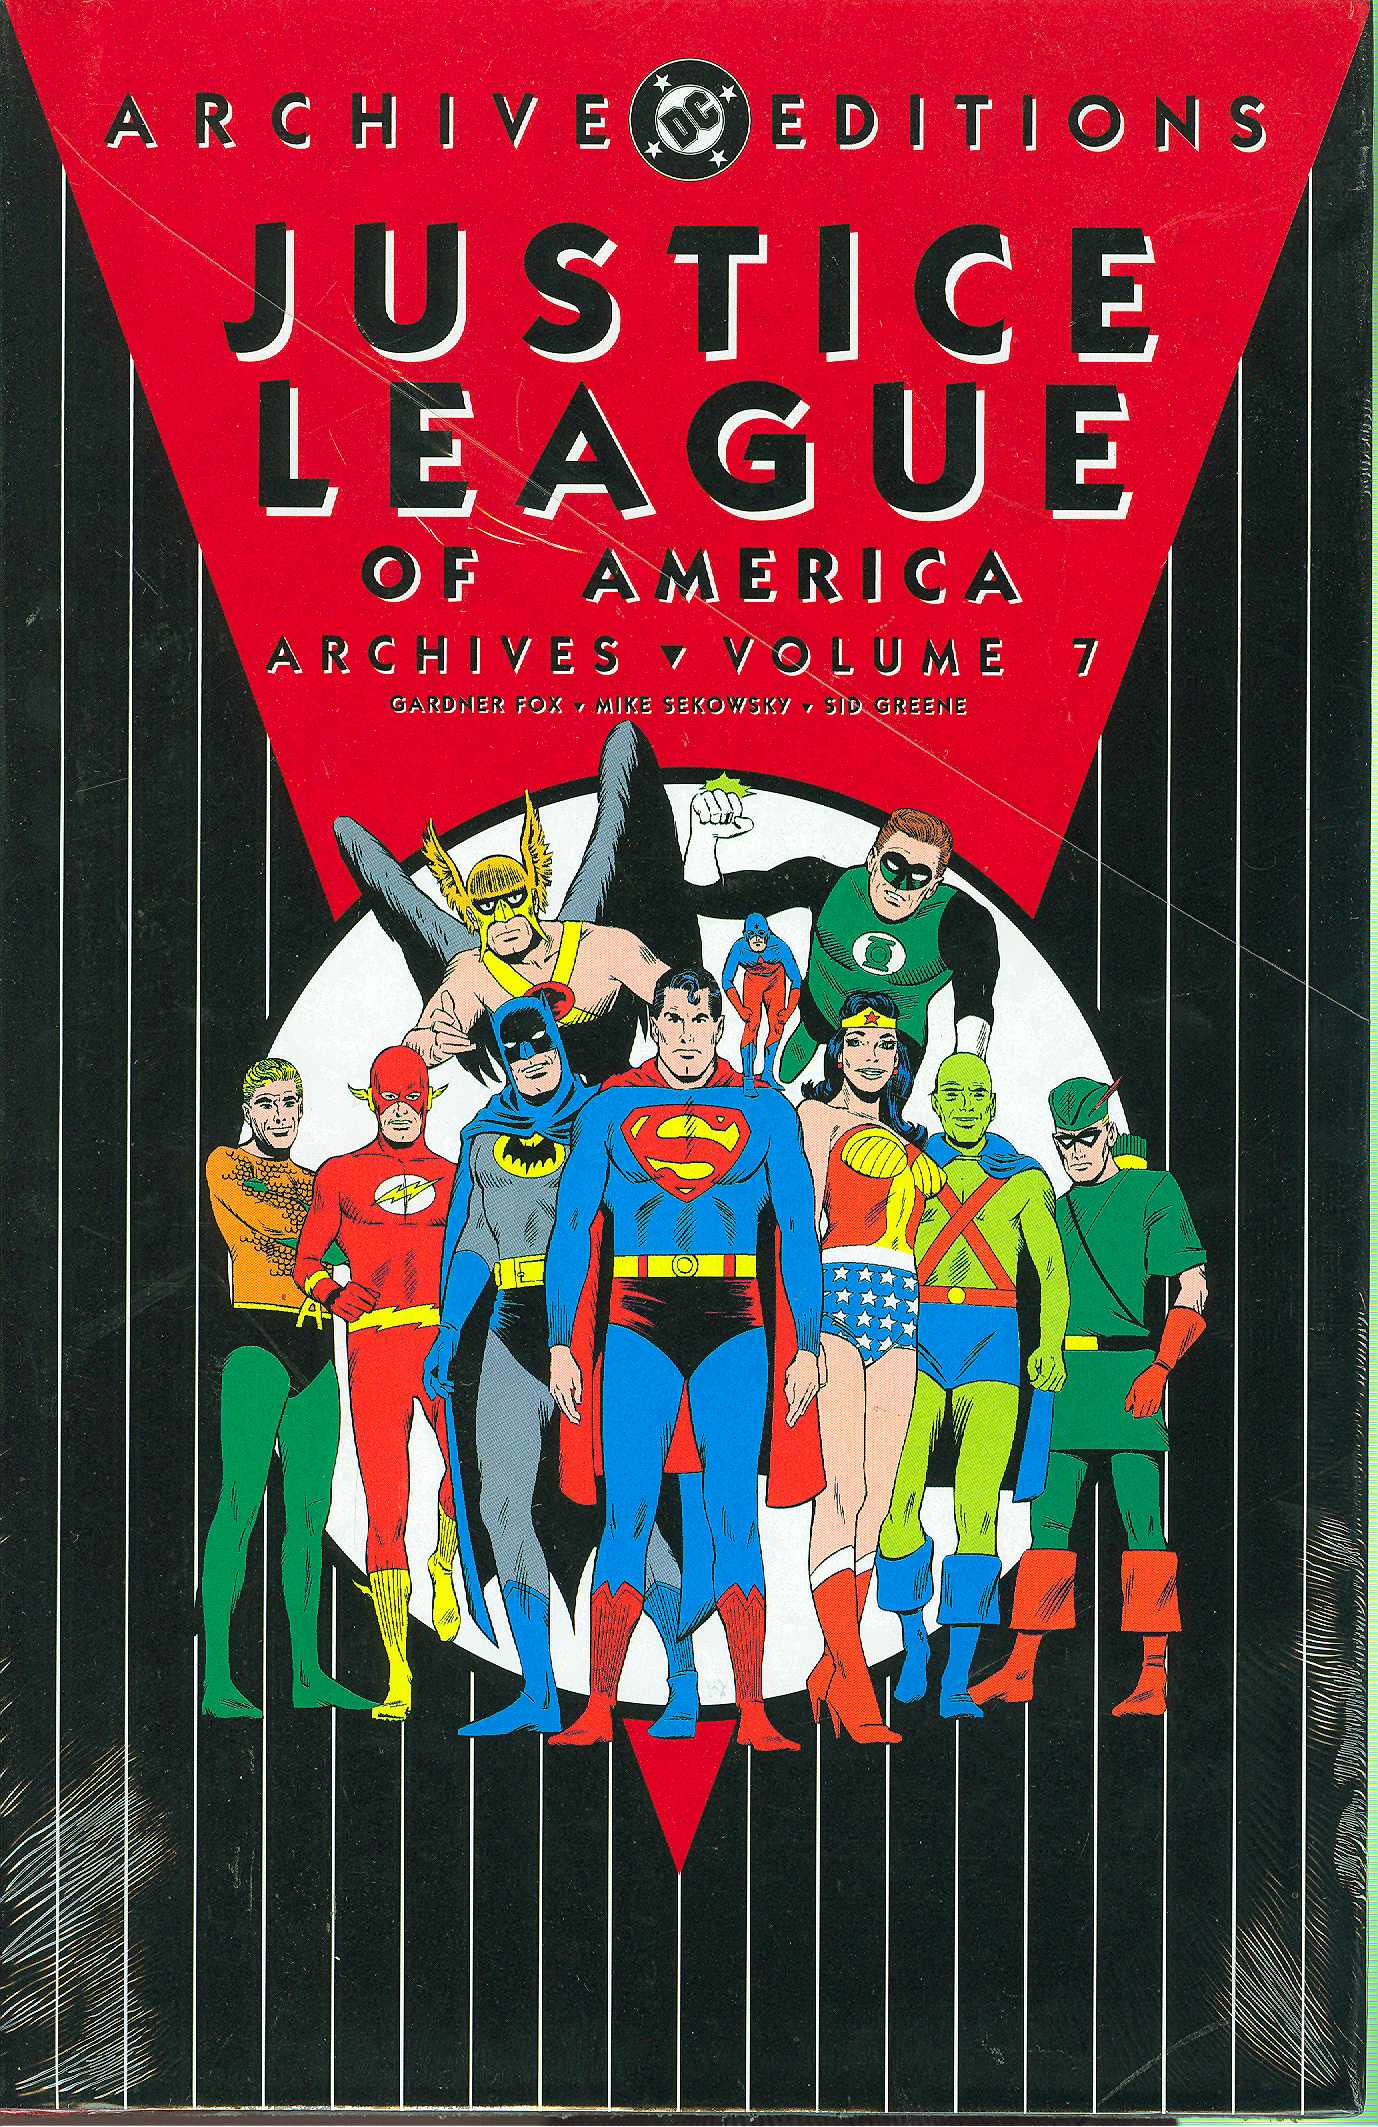 Justice League of America Archives Hardcover Volume 7